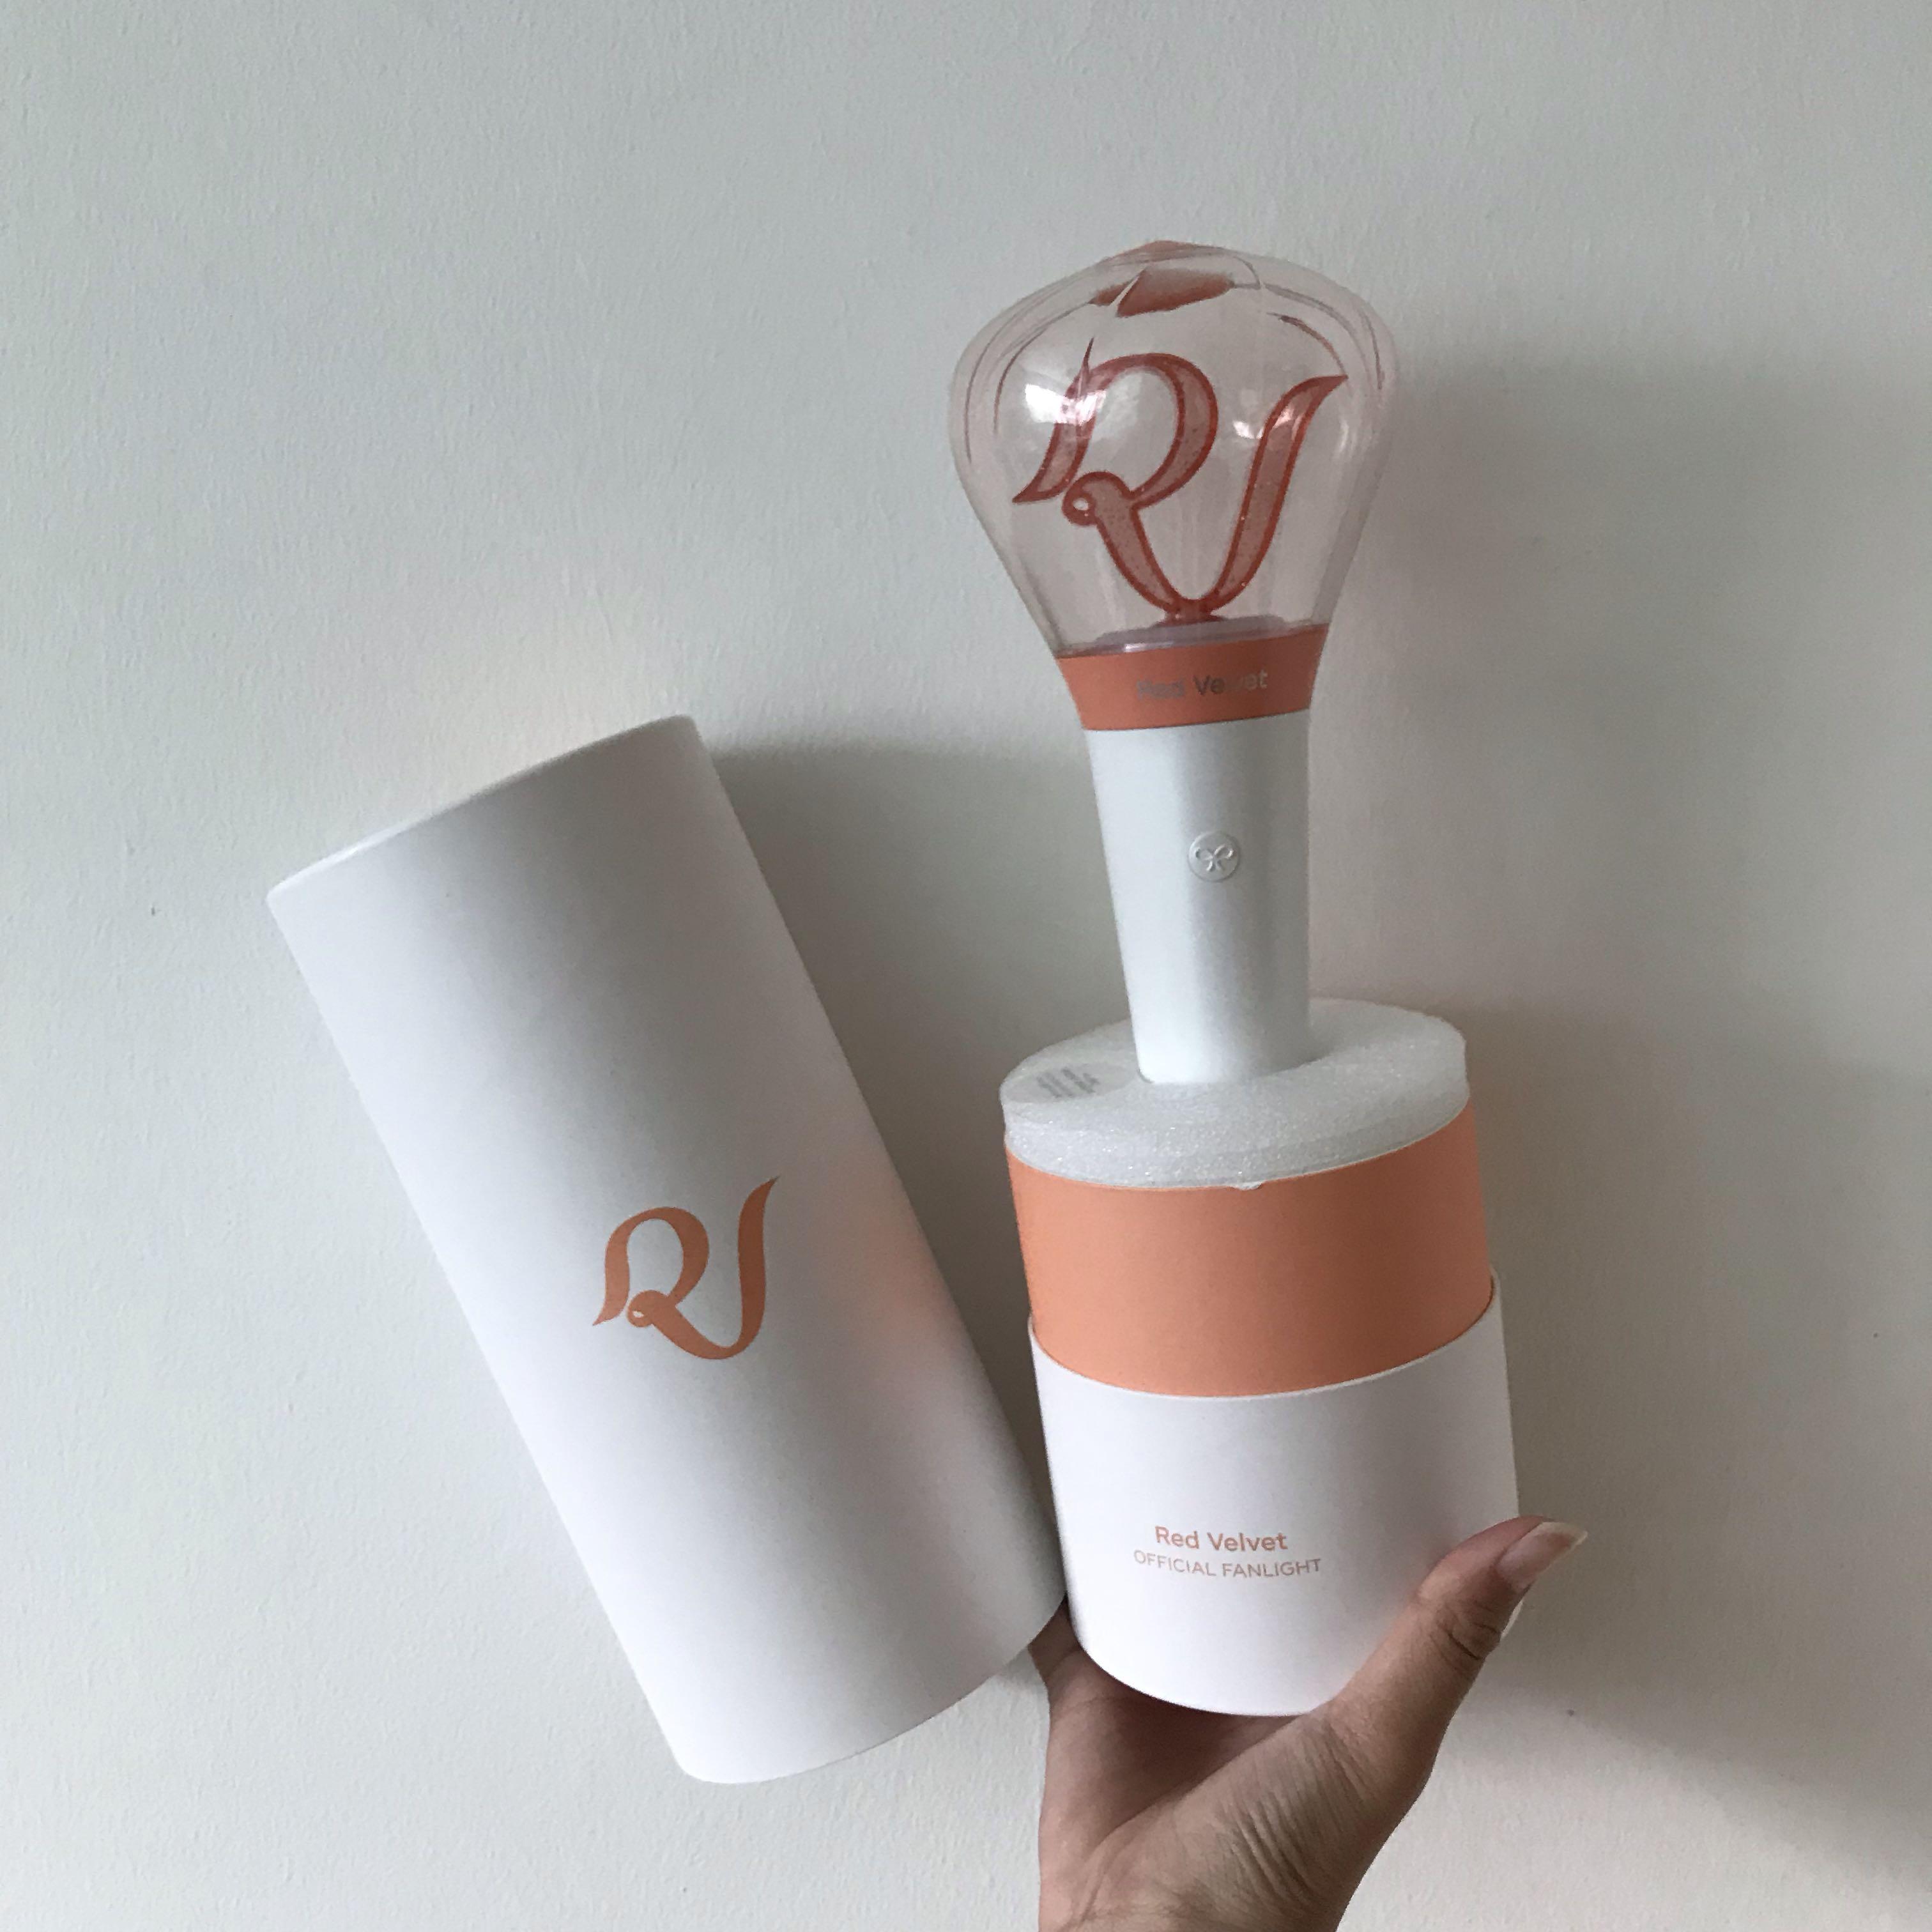 Itzy Unofficial Lightstick - itzy 2020